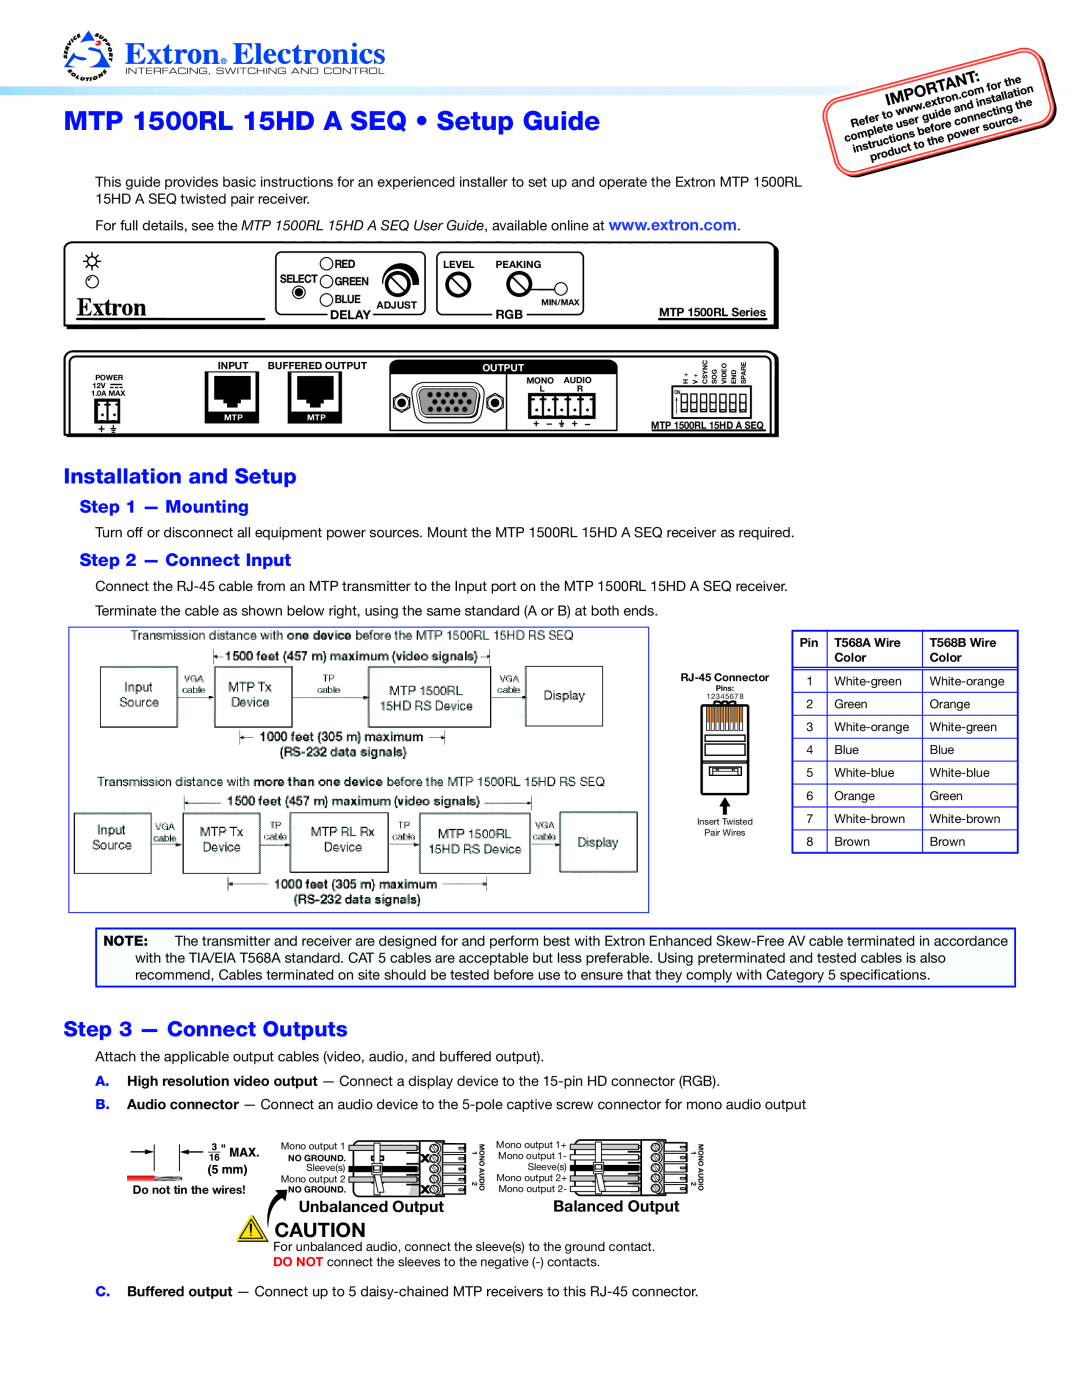 Extron electronic setup guide MTP 1500RL 15HD A SEQ Setup Guide, Mounting, Connect Input, Installation and Setup 